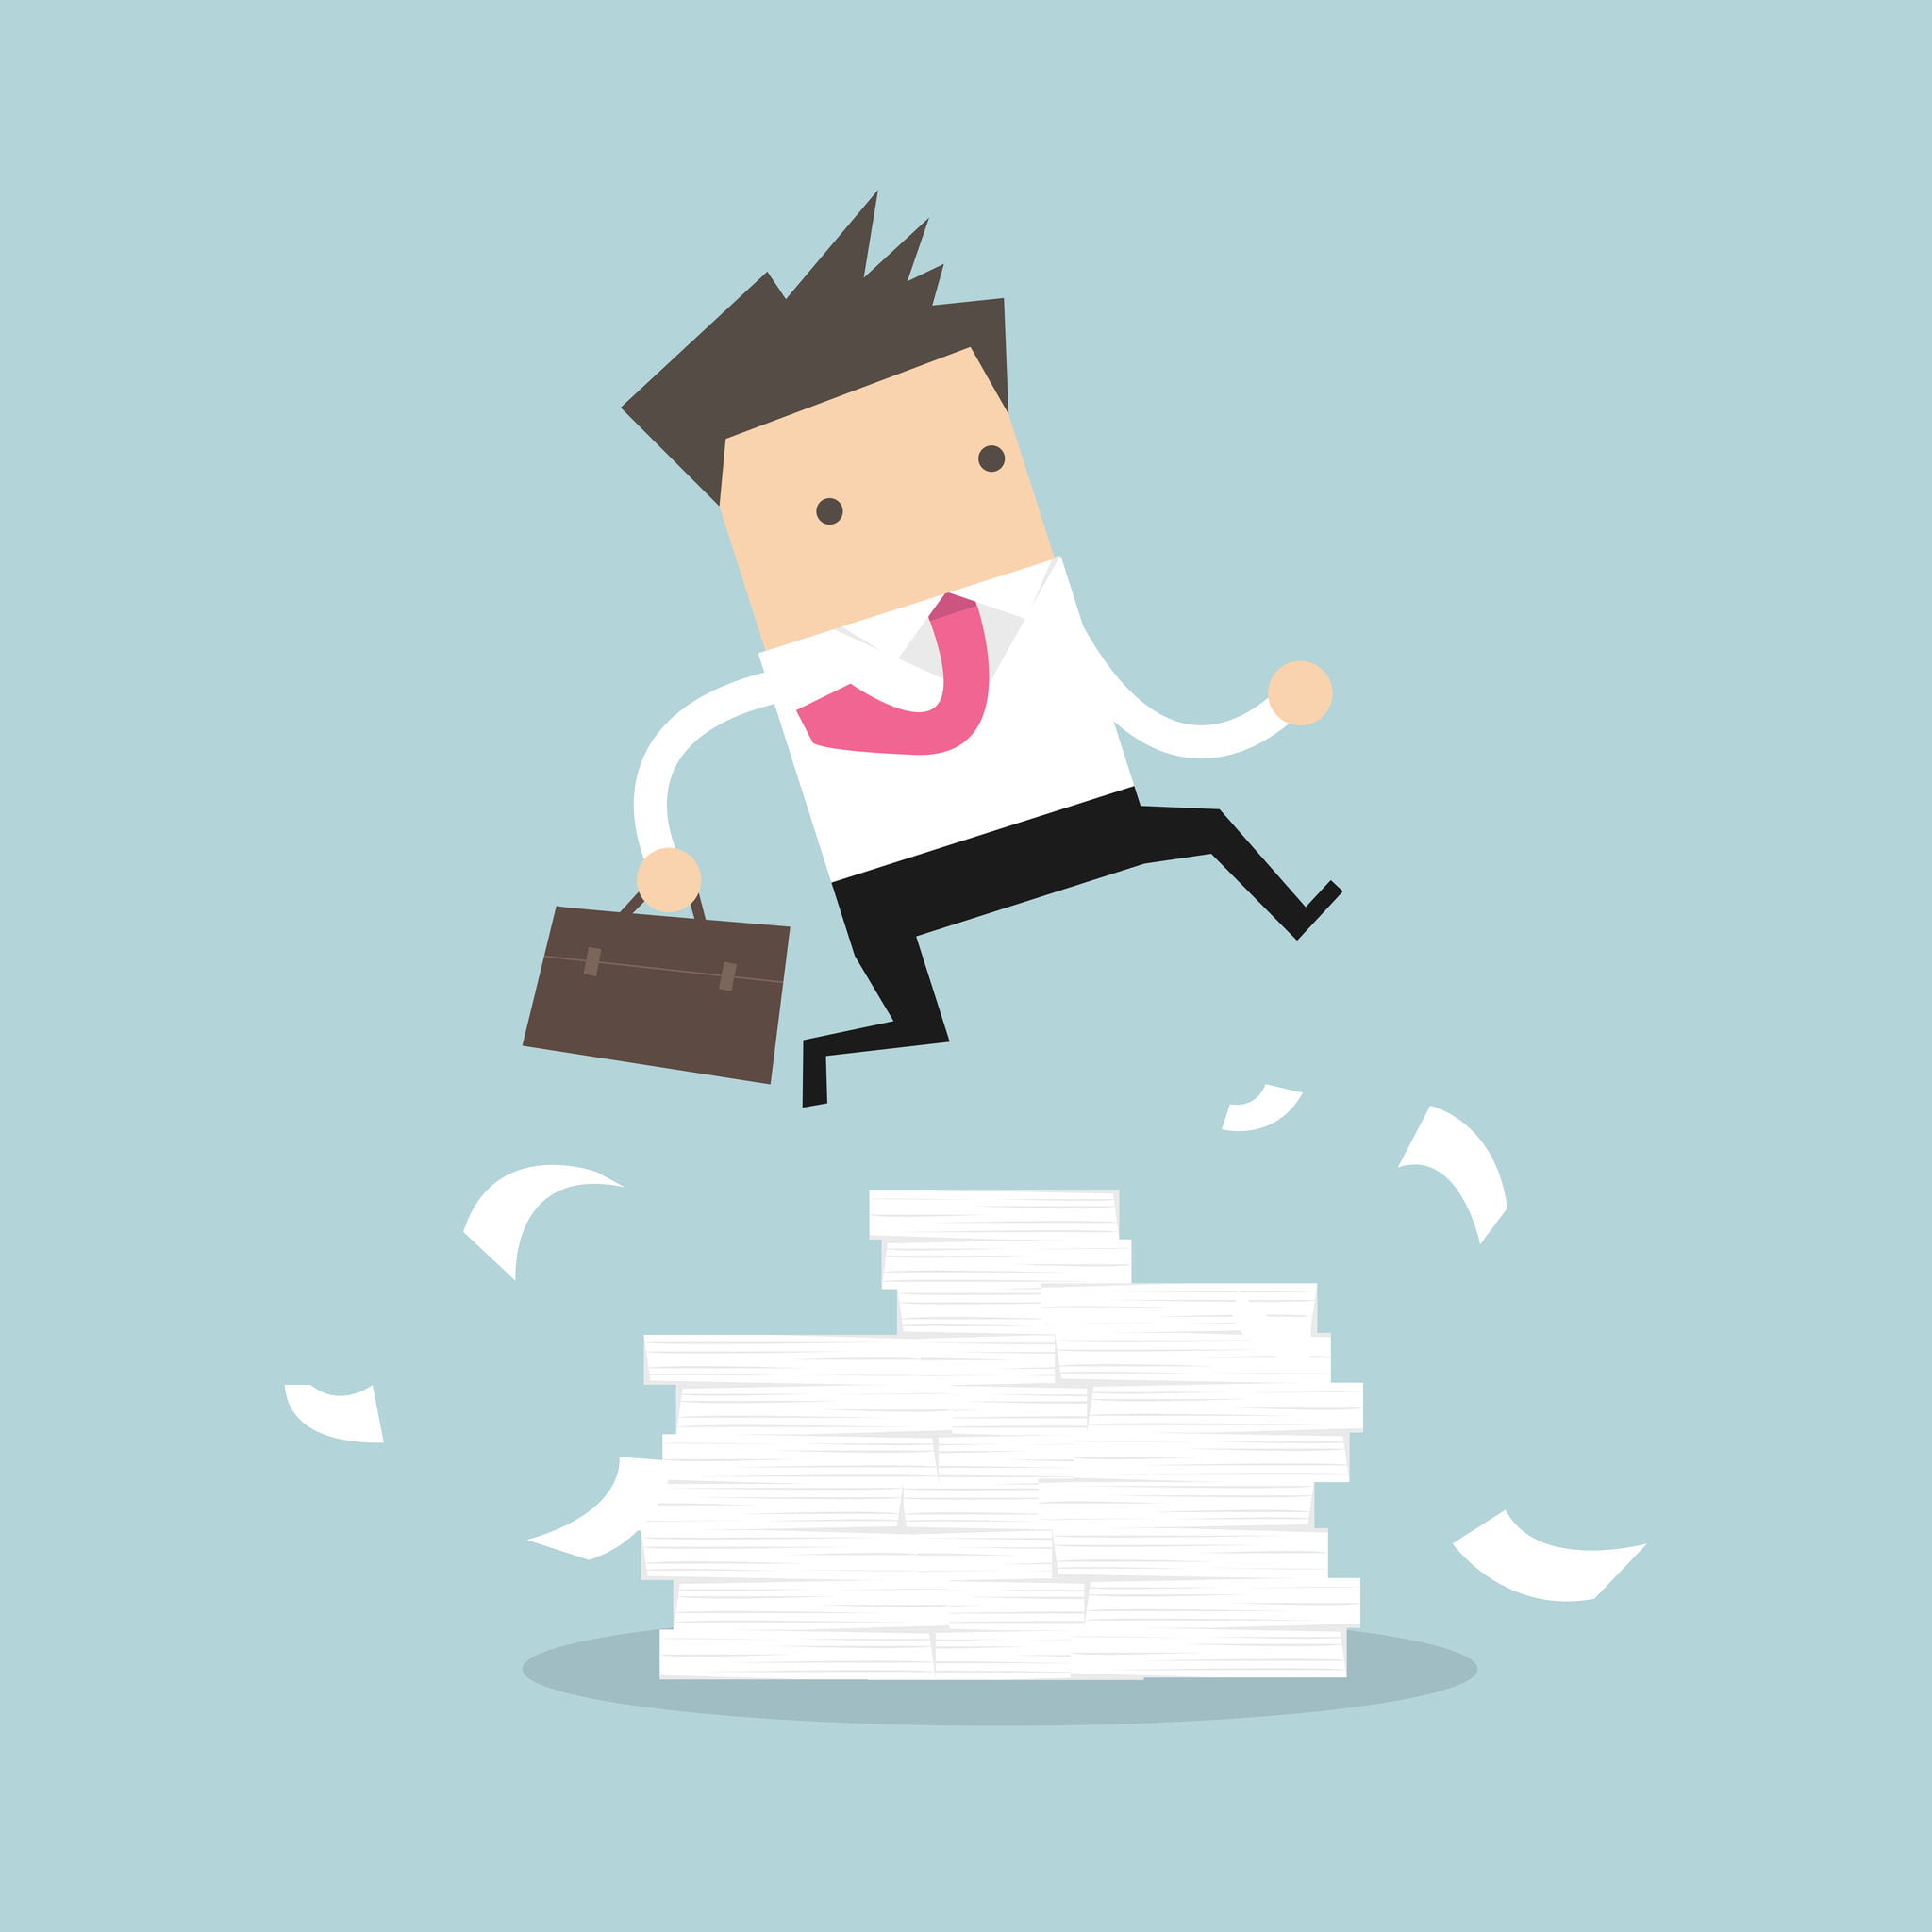 87183336 - businessman or manager jumping over obstacles. large stack of documents. vector